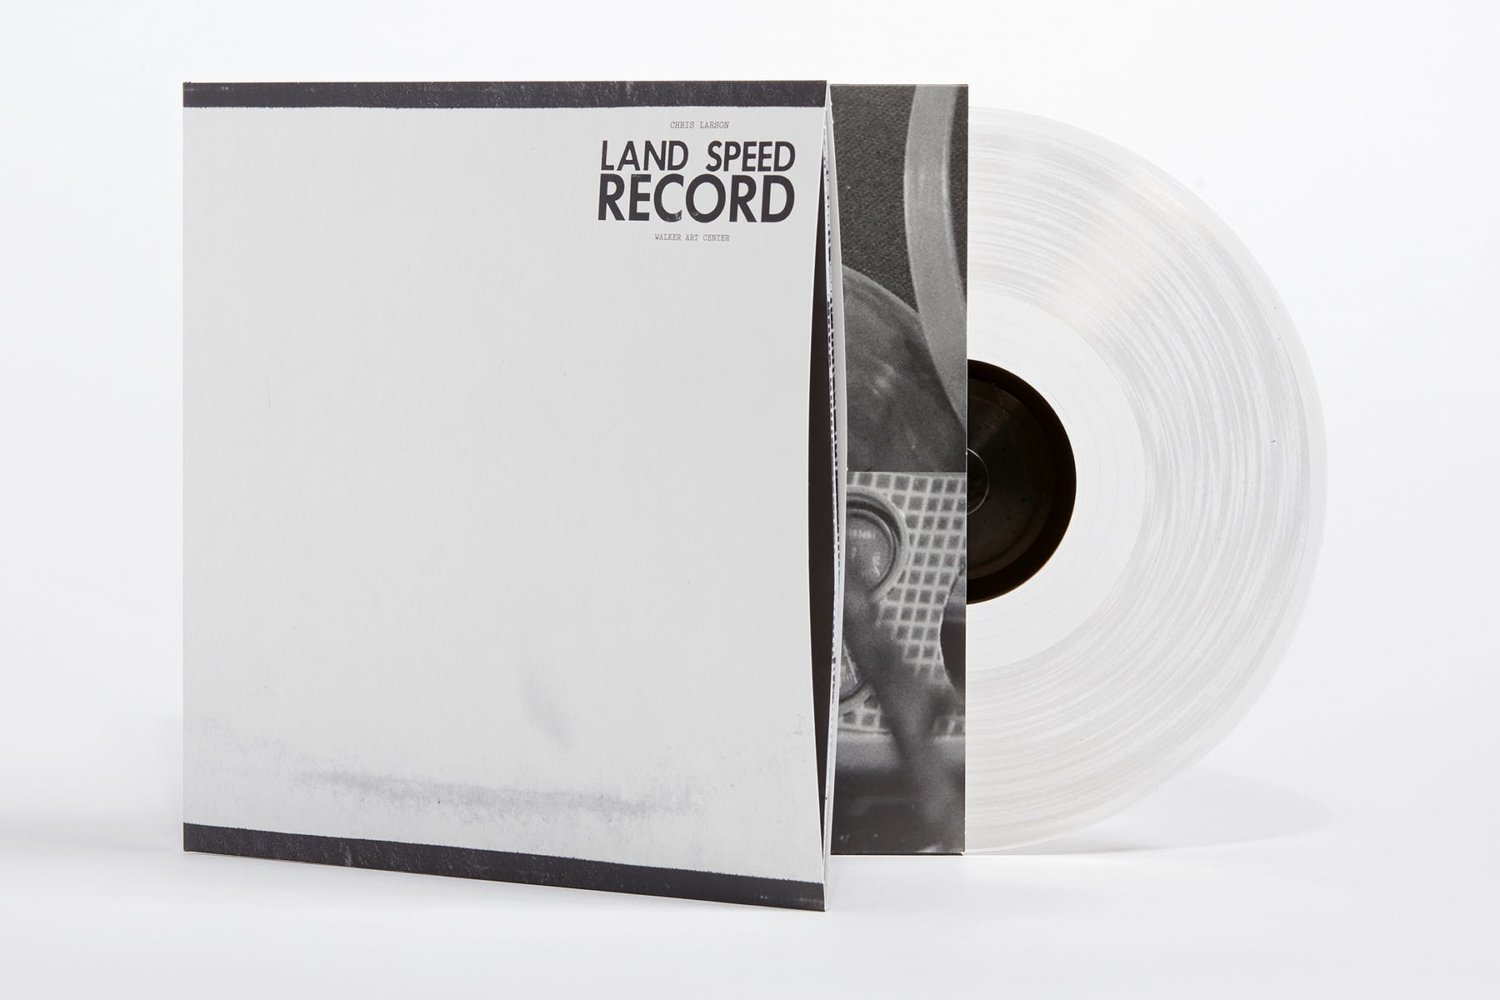 Chris Larson: Land Speed Record Limited Edition Clear Vinyl with Signed  Print